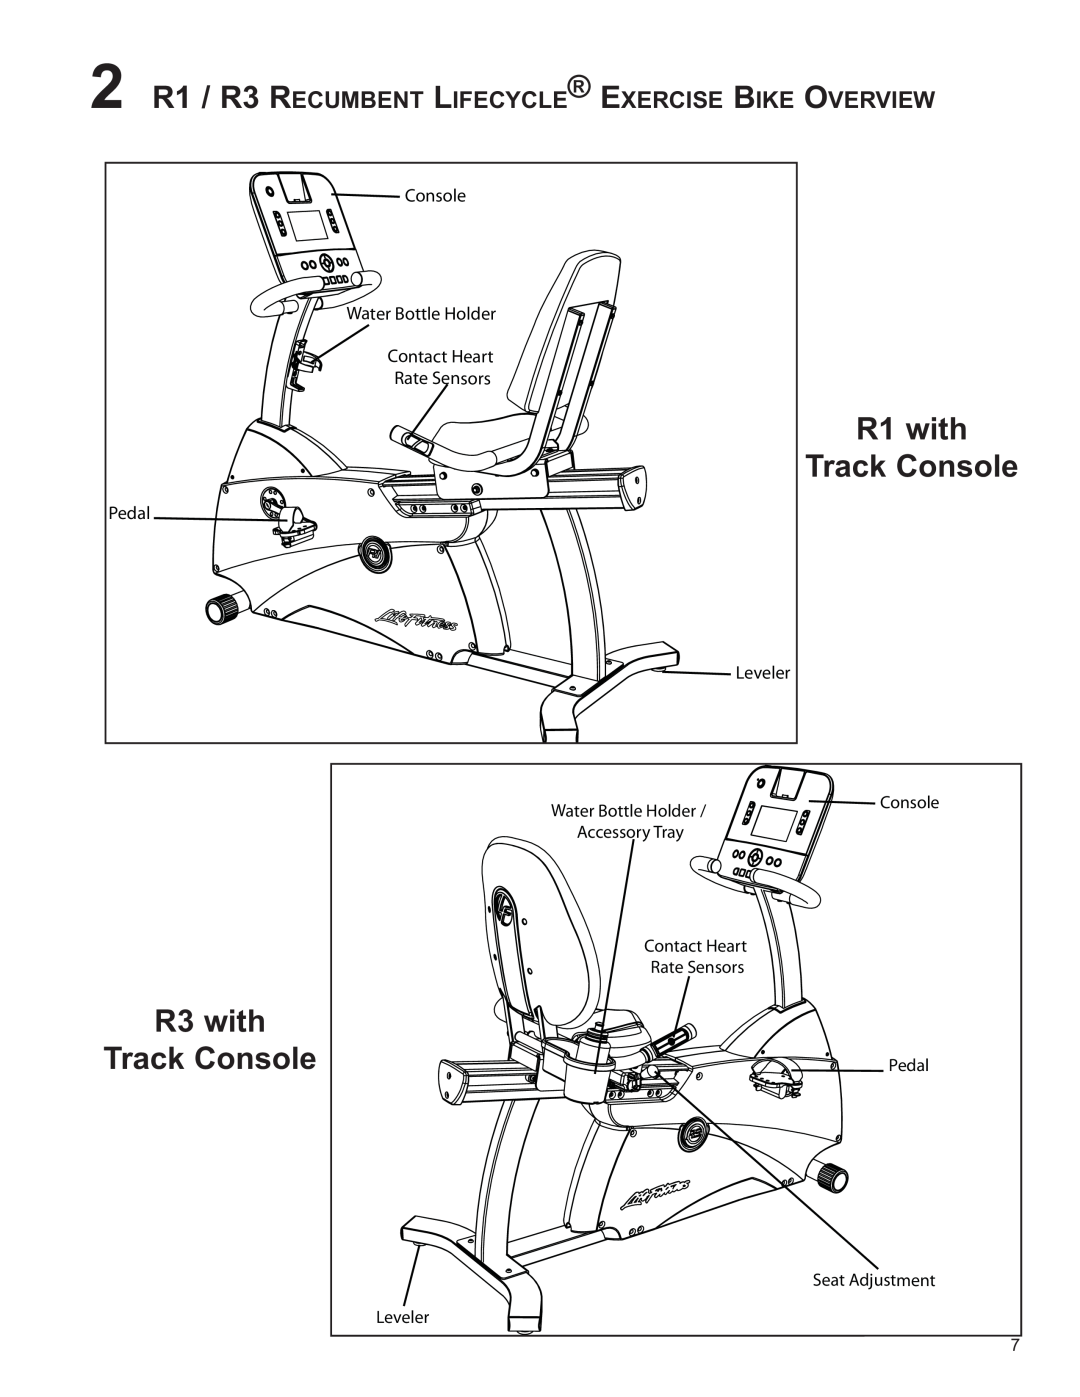 Life Fitness 2 R1 / R3 RECUMBENT LIFECYCLE EXERCISE BIKE OVERVIEW, R1 with Track Console, R3 with Track Console 